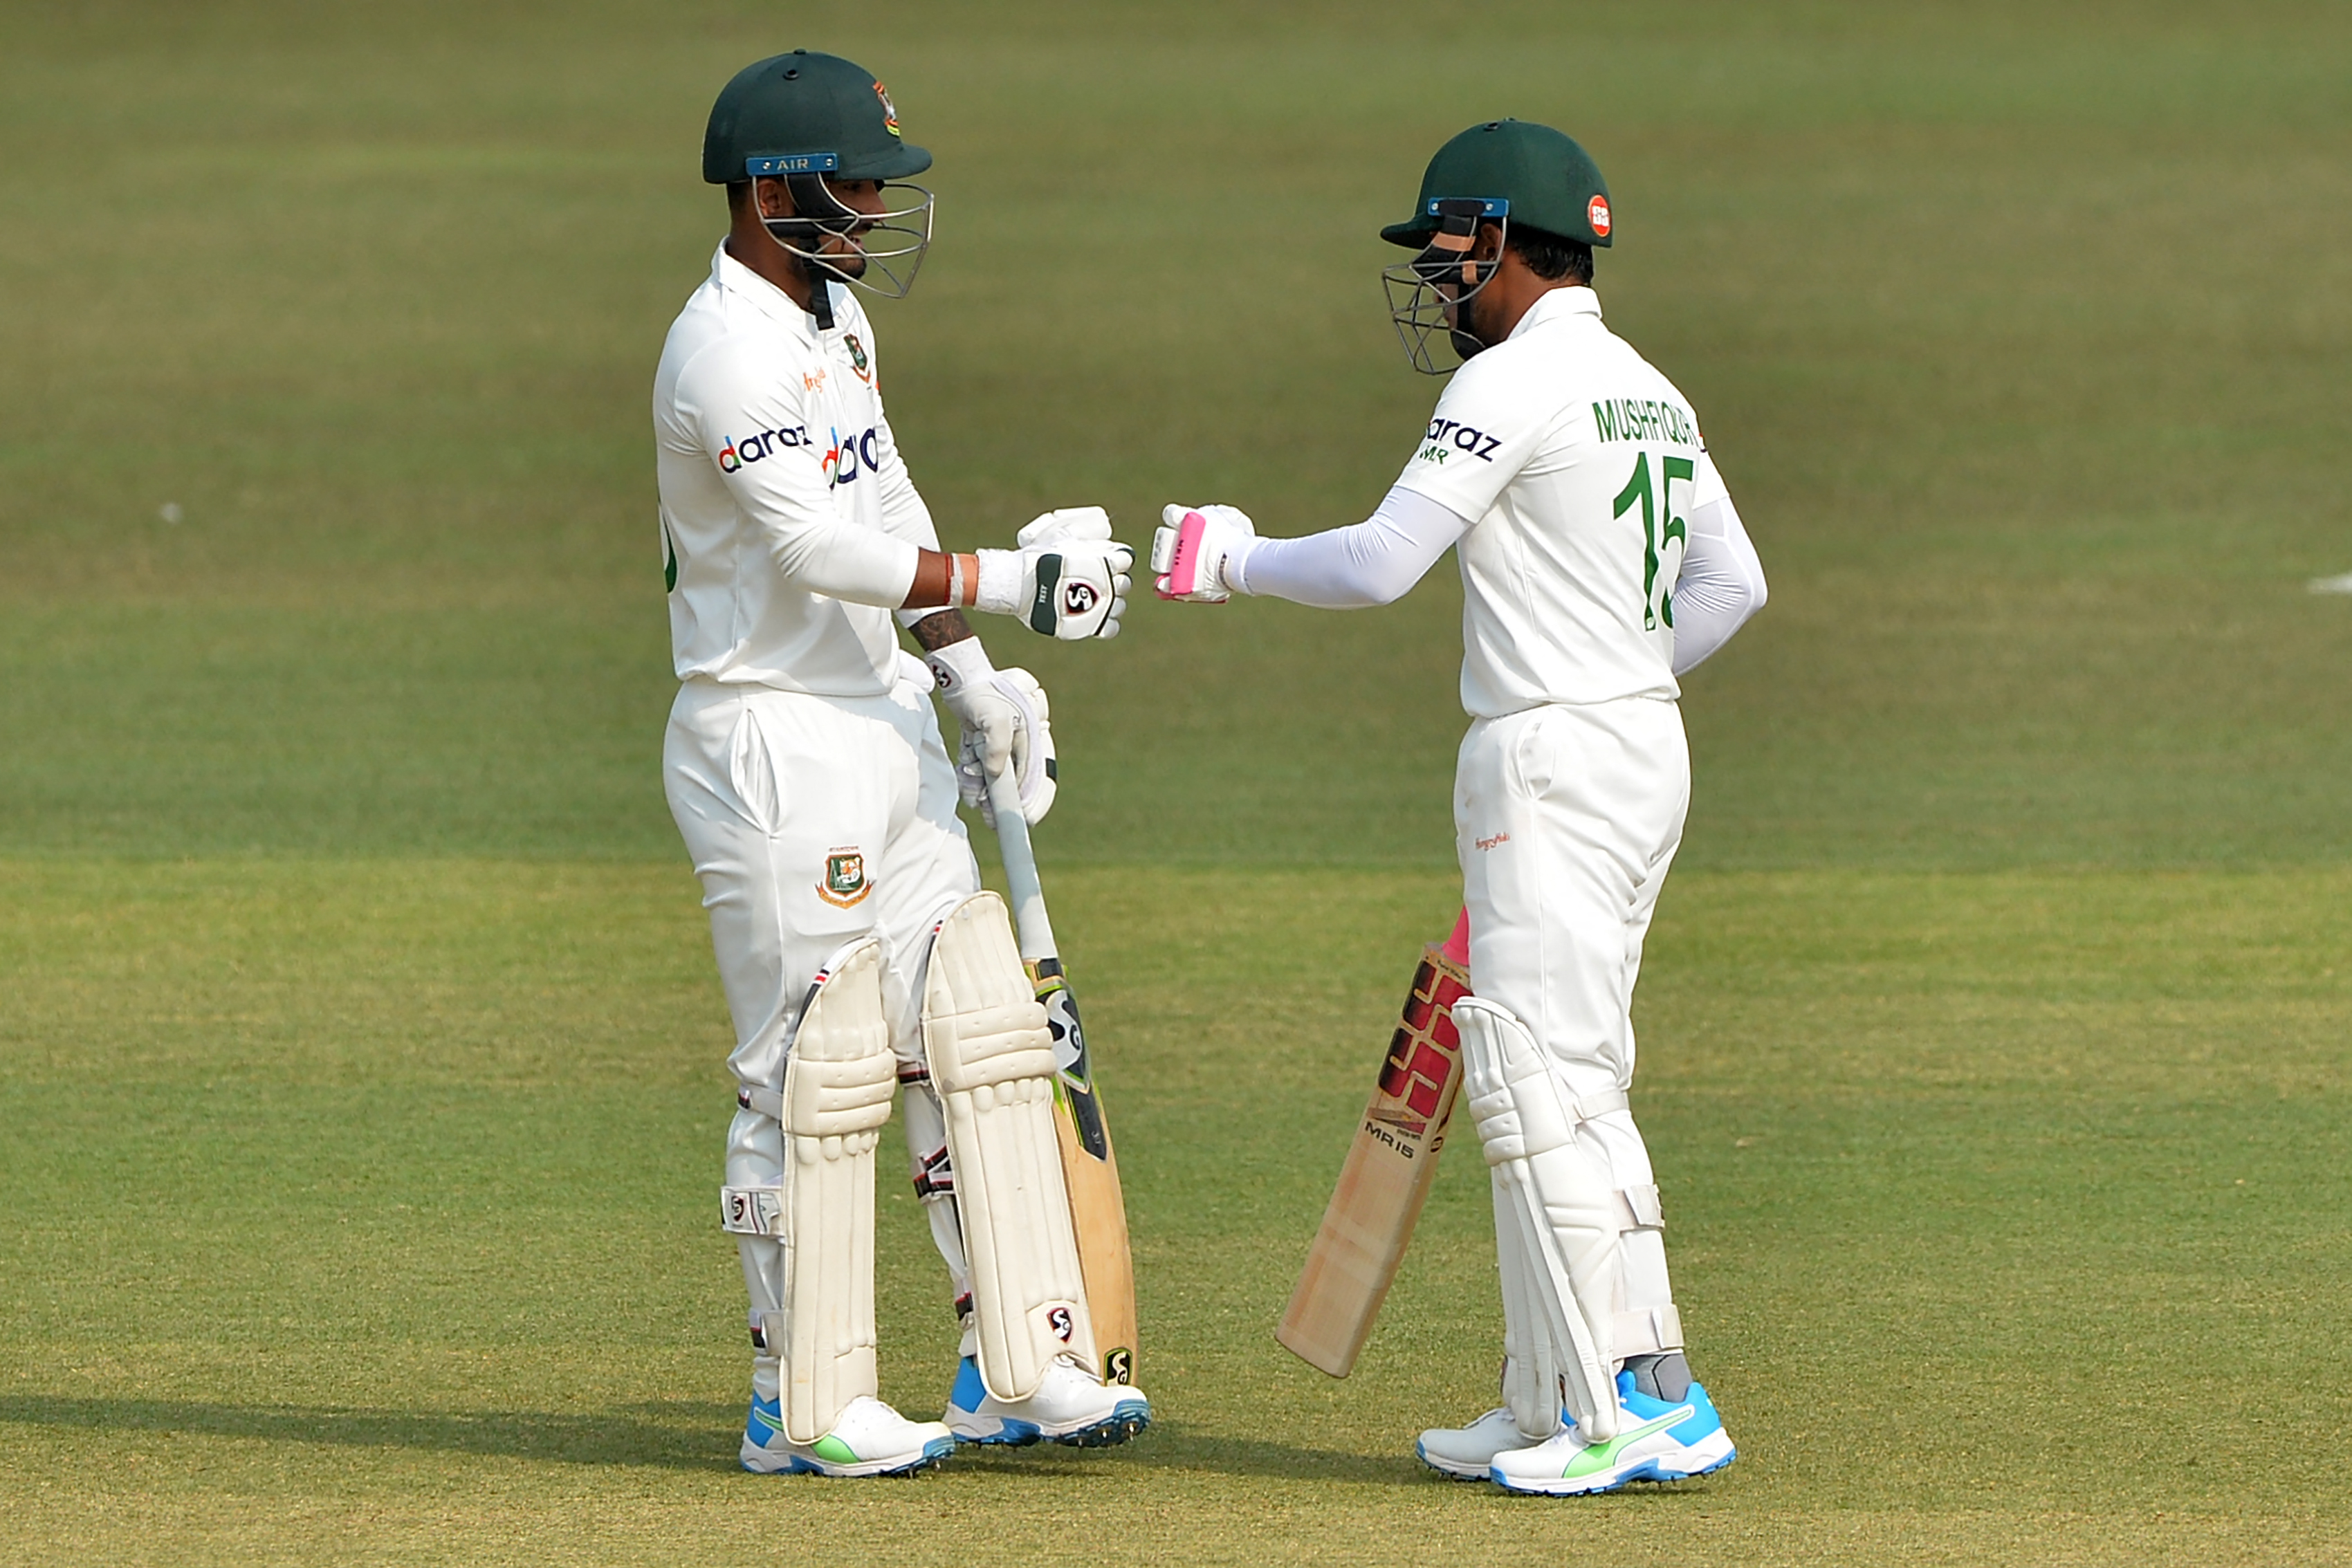 BAN vs NZ | All members of Bangladesh team tests Covid-19 negative, New Zealand tour set to go ahead 